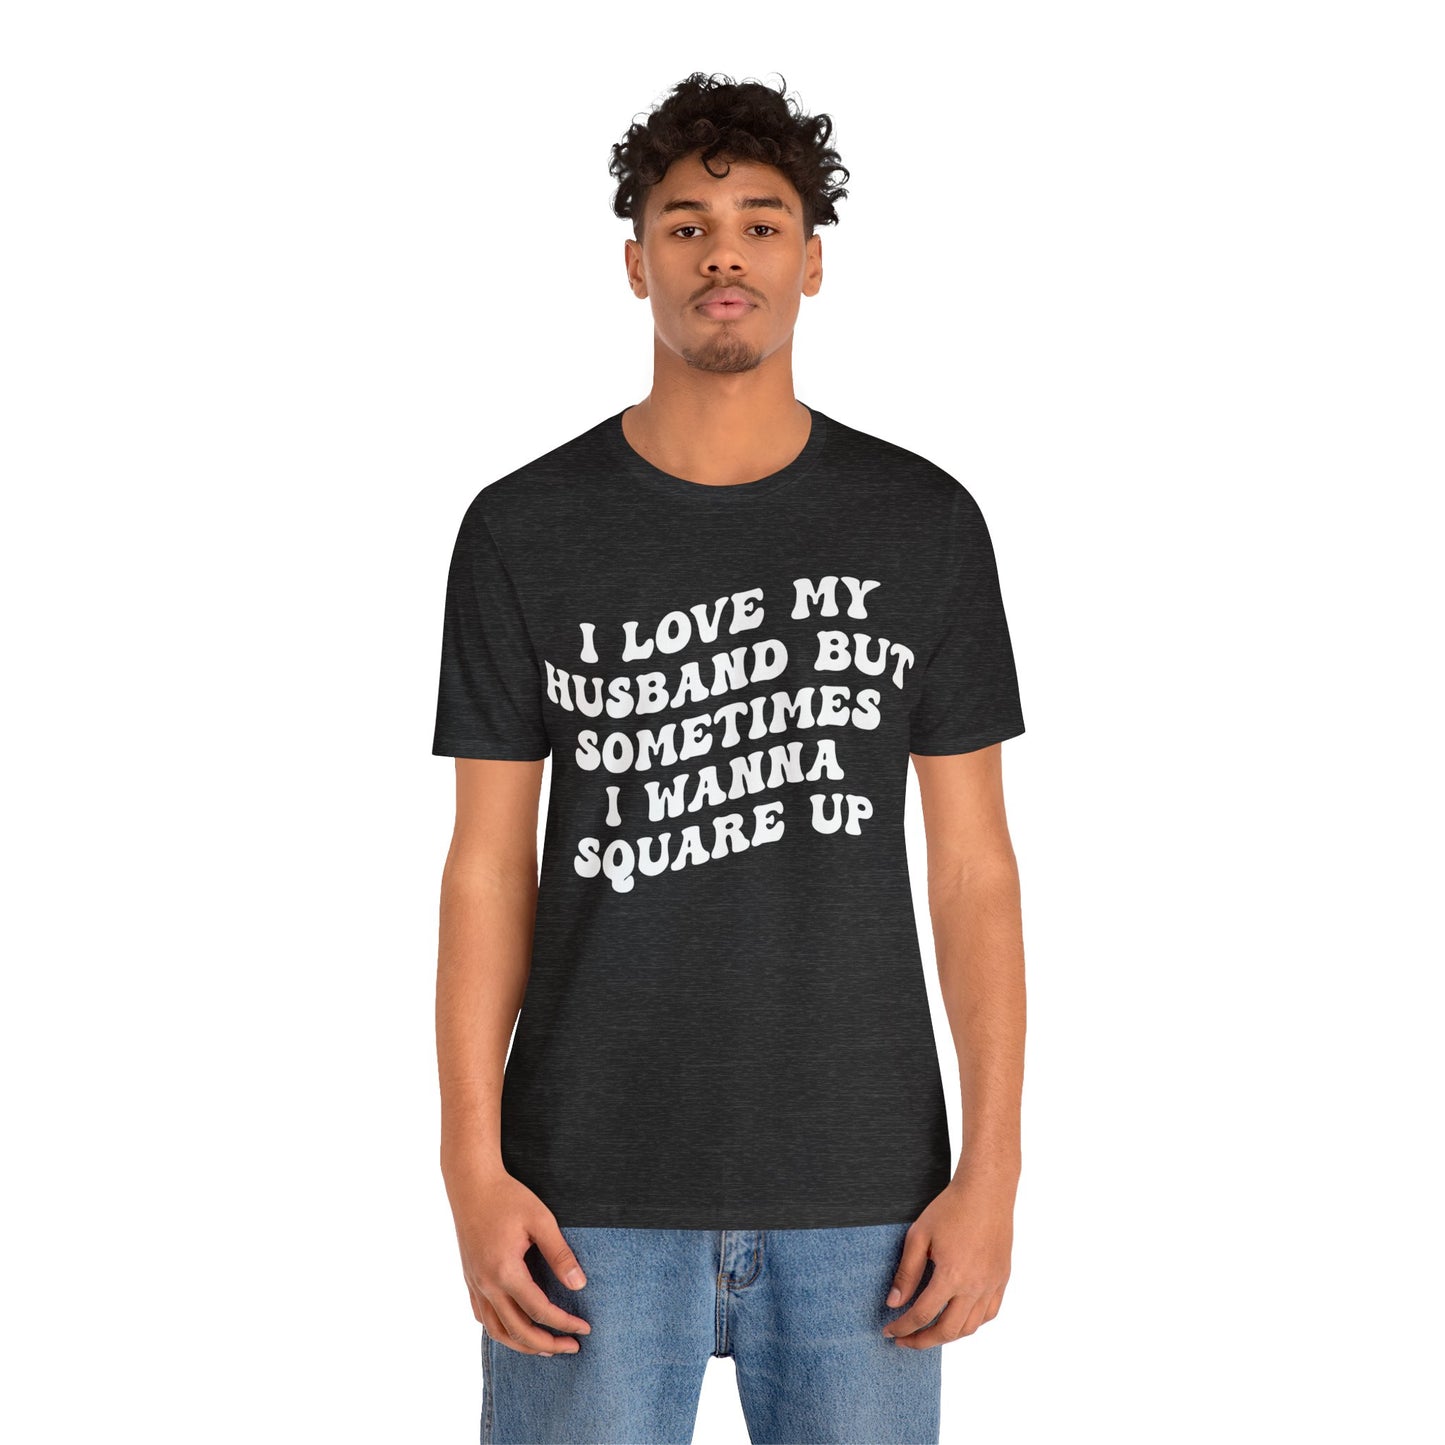 I Love My Husband But Sometimes I Wanna Square Up Shirt, Wife Life Shirt, Shirt for Wife, Funny Shirt for Wife, Mom Gift, T1142